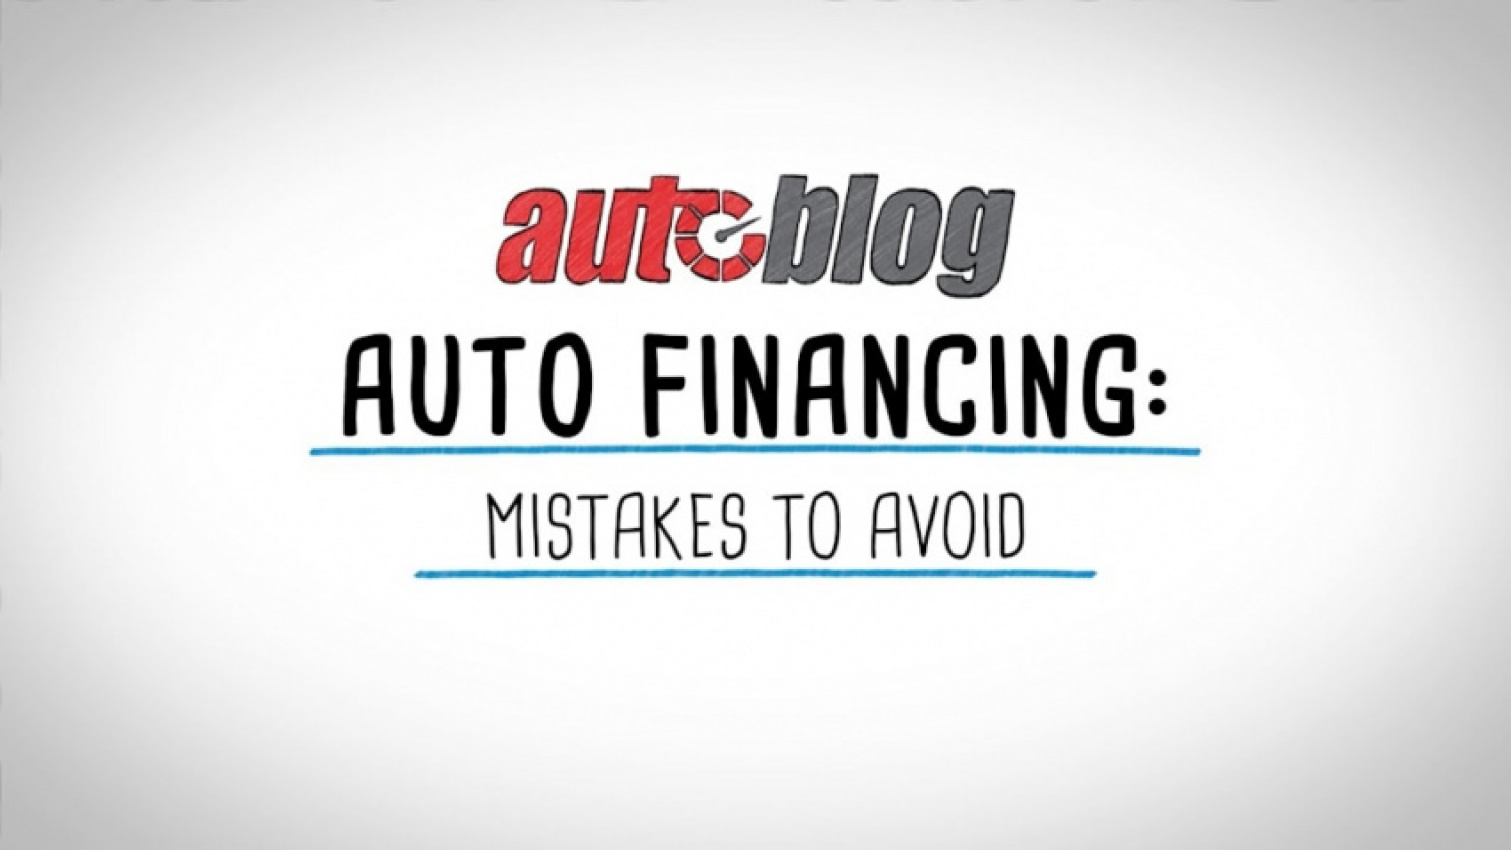 autos, cars, how to, car buying, explainer, how-to, new car buying, original video, how to, how to avoid auto financing mistakes